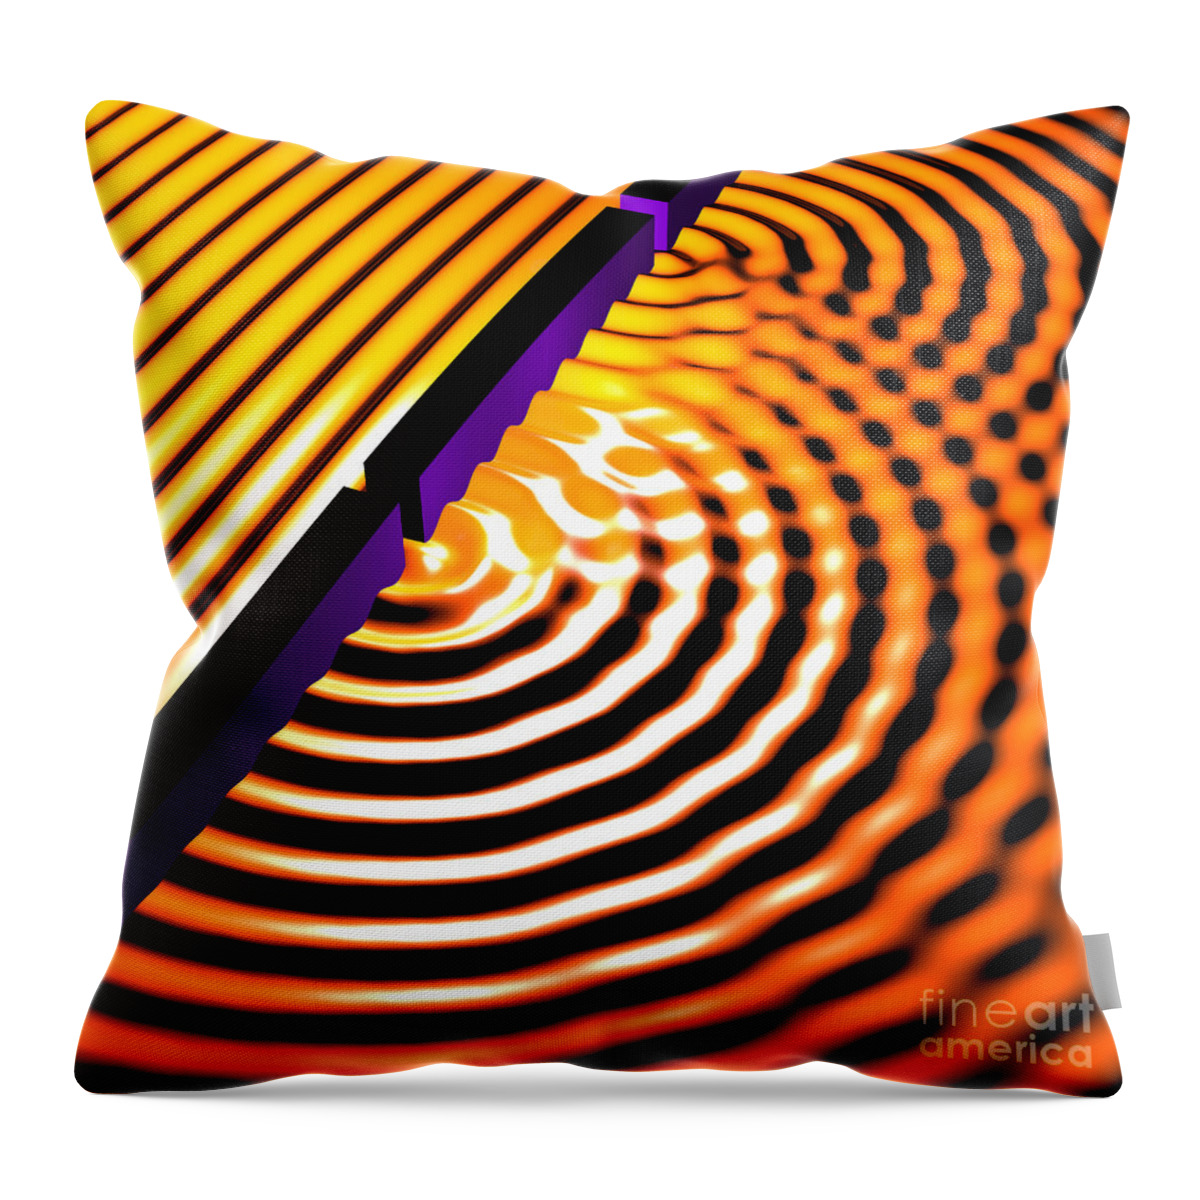 Beams Throw Pillow featuring the digital art Waves Two Slit 2 by Russell Kightley